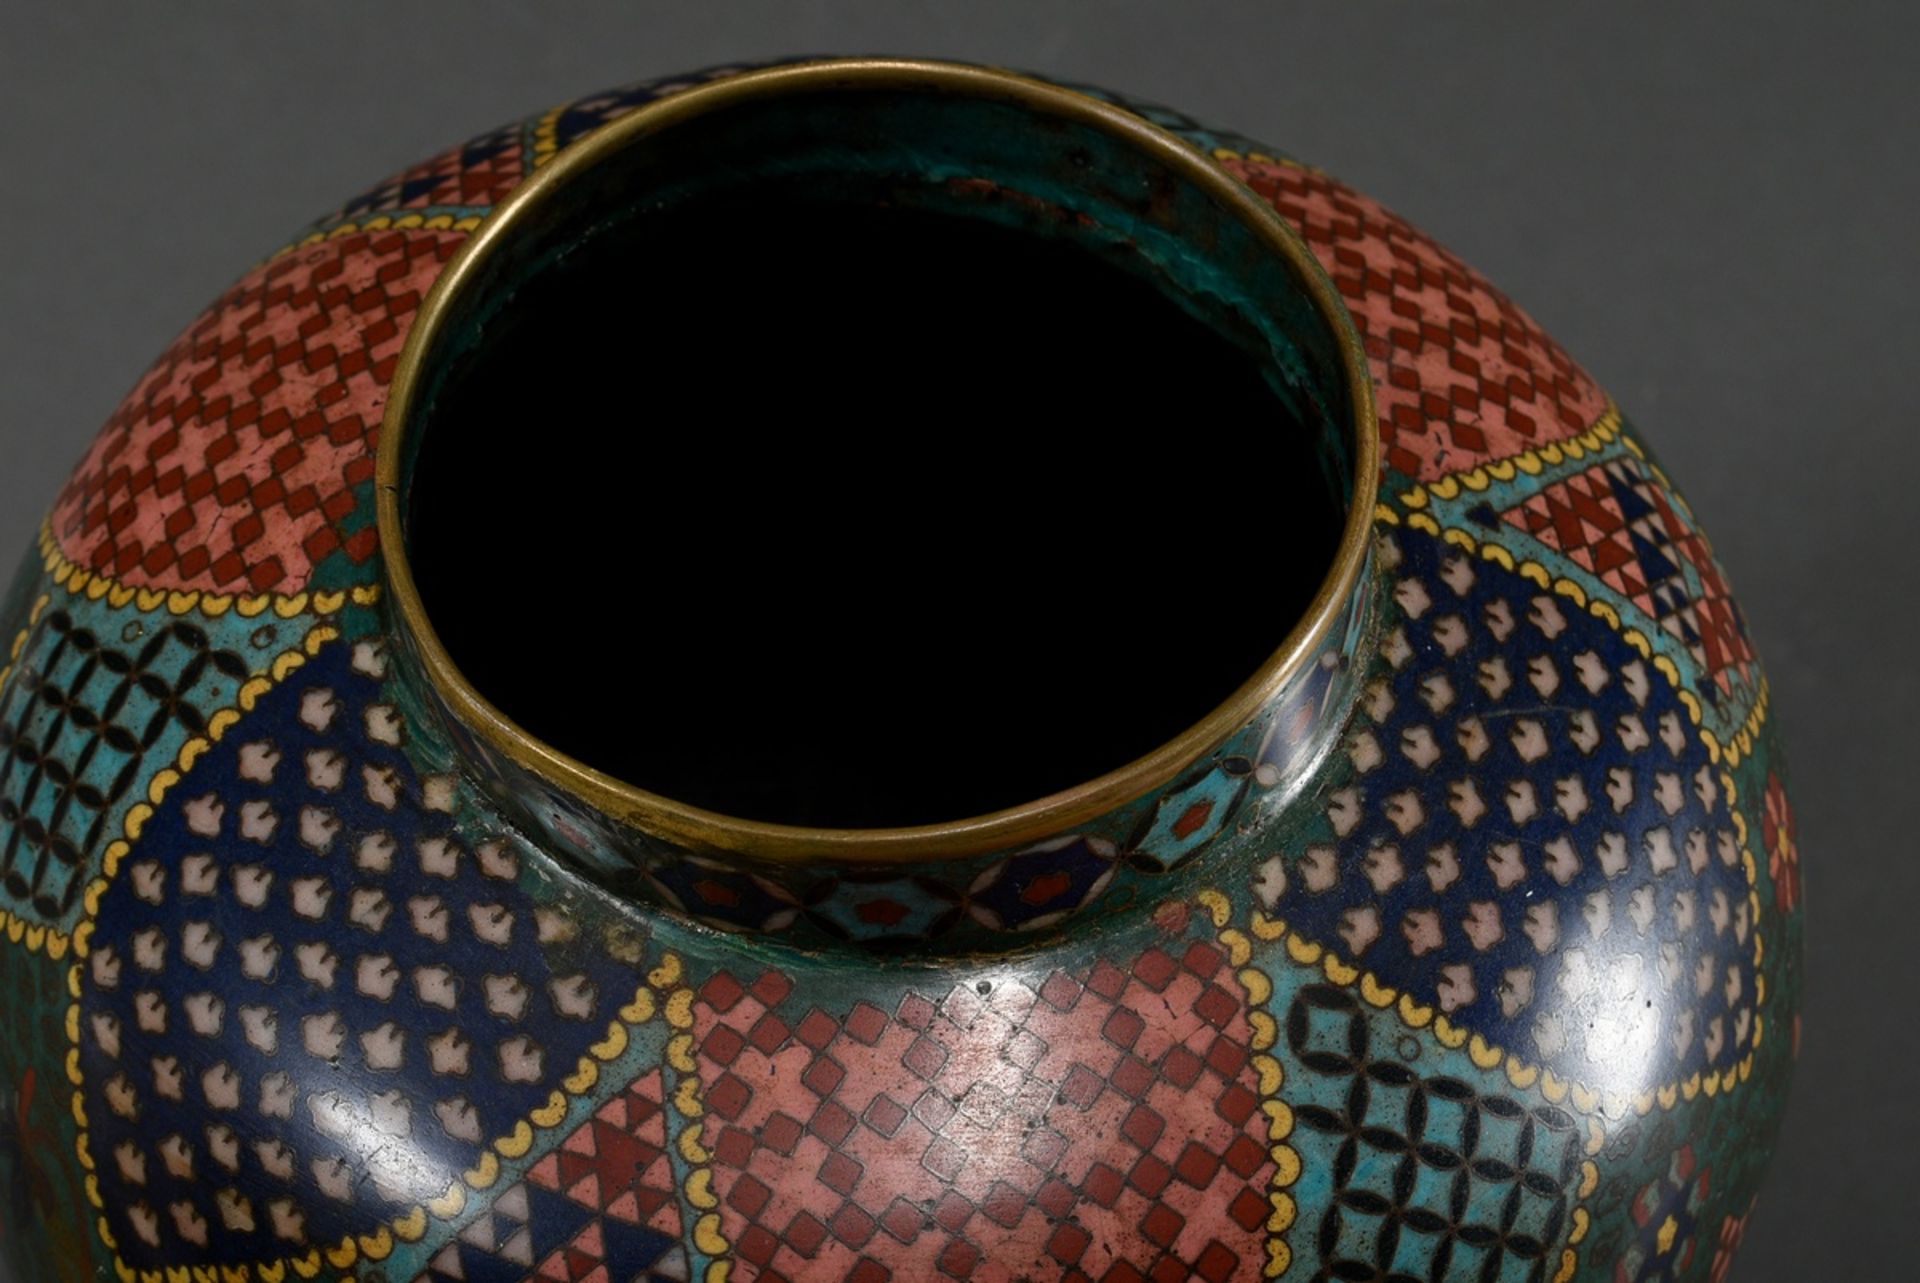 Large cloisonné shoulder vase with floral and geometric decoration in dark shades on a dark green b - Image 5 of 7